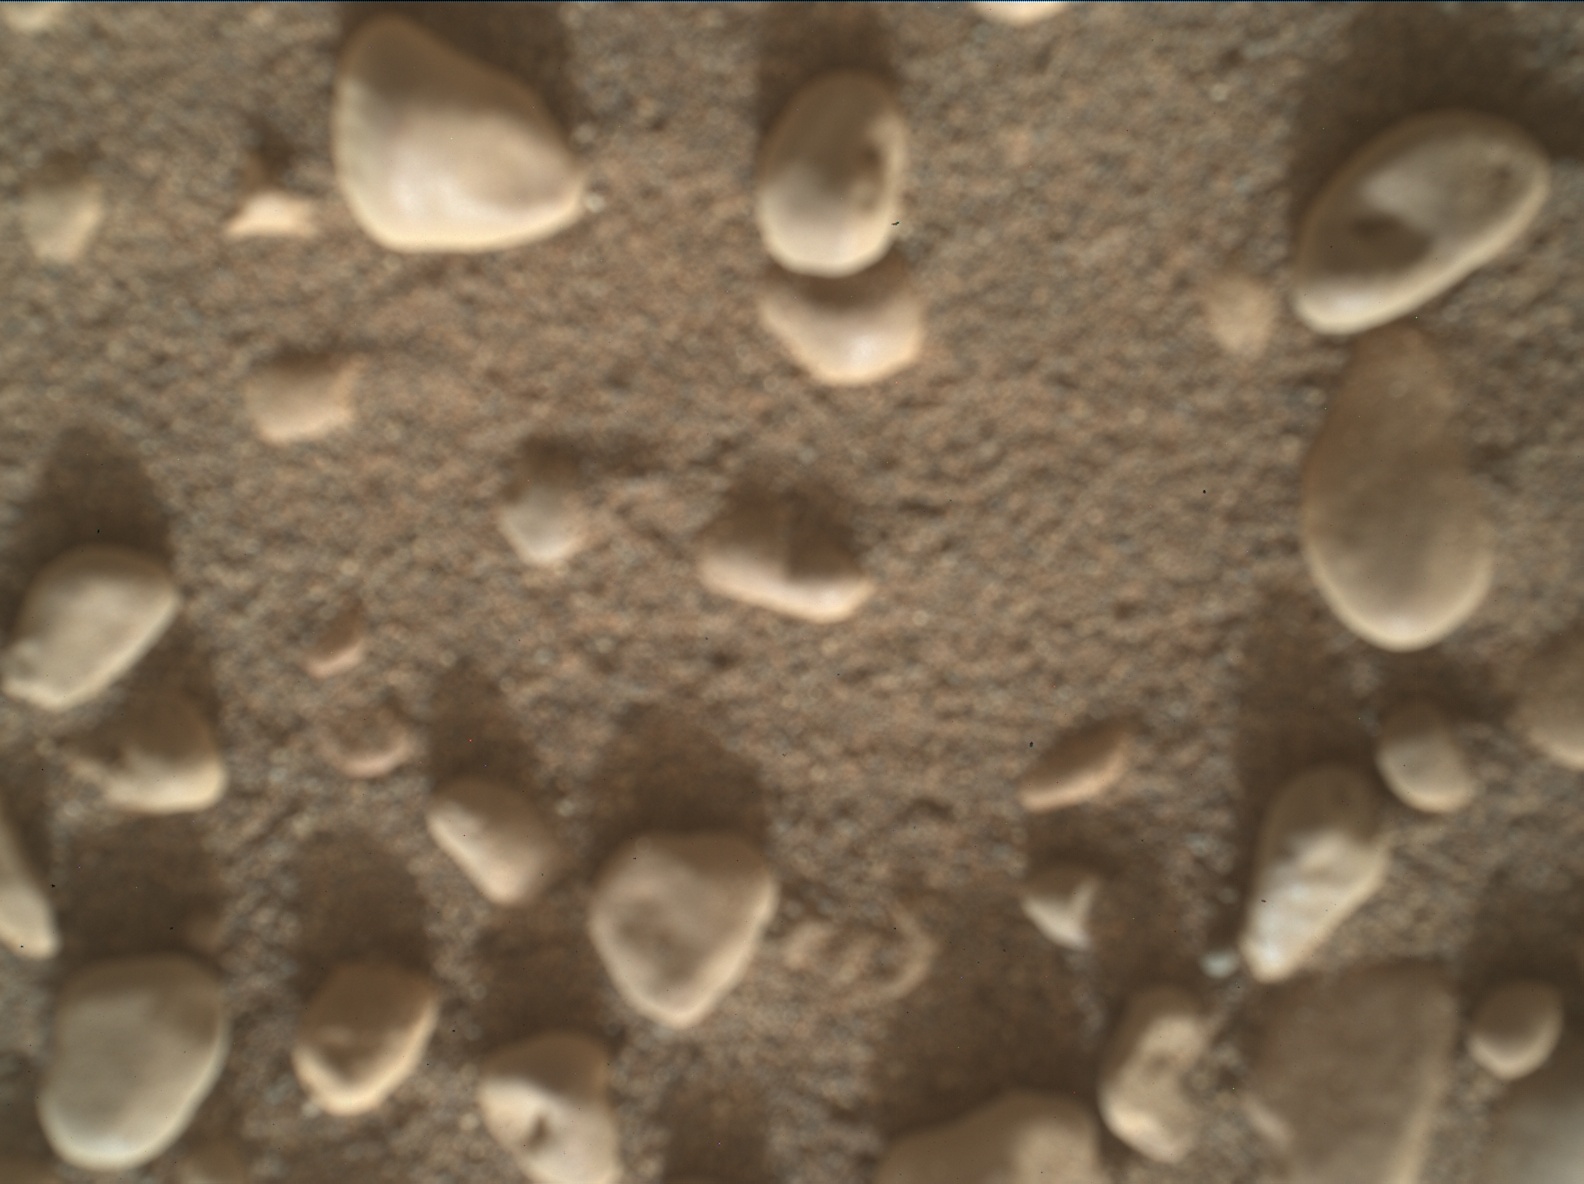 Nasa's Mars rover Curiosity acquired this image using its Mars Hand Lens Imager (MAHLI) on Sol 2437